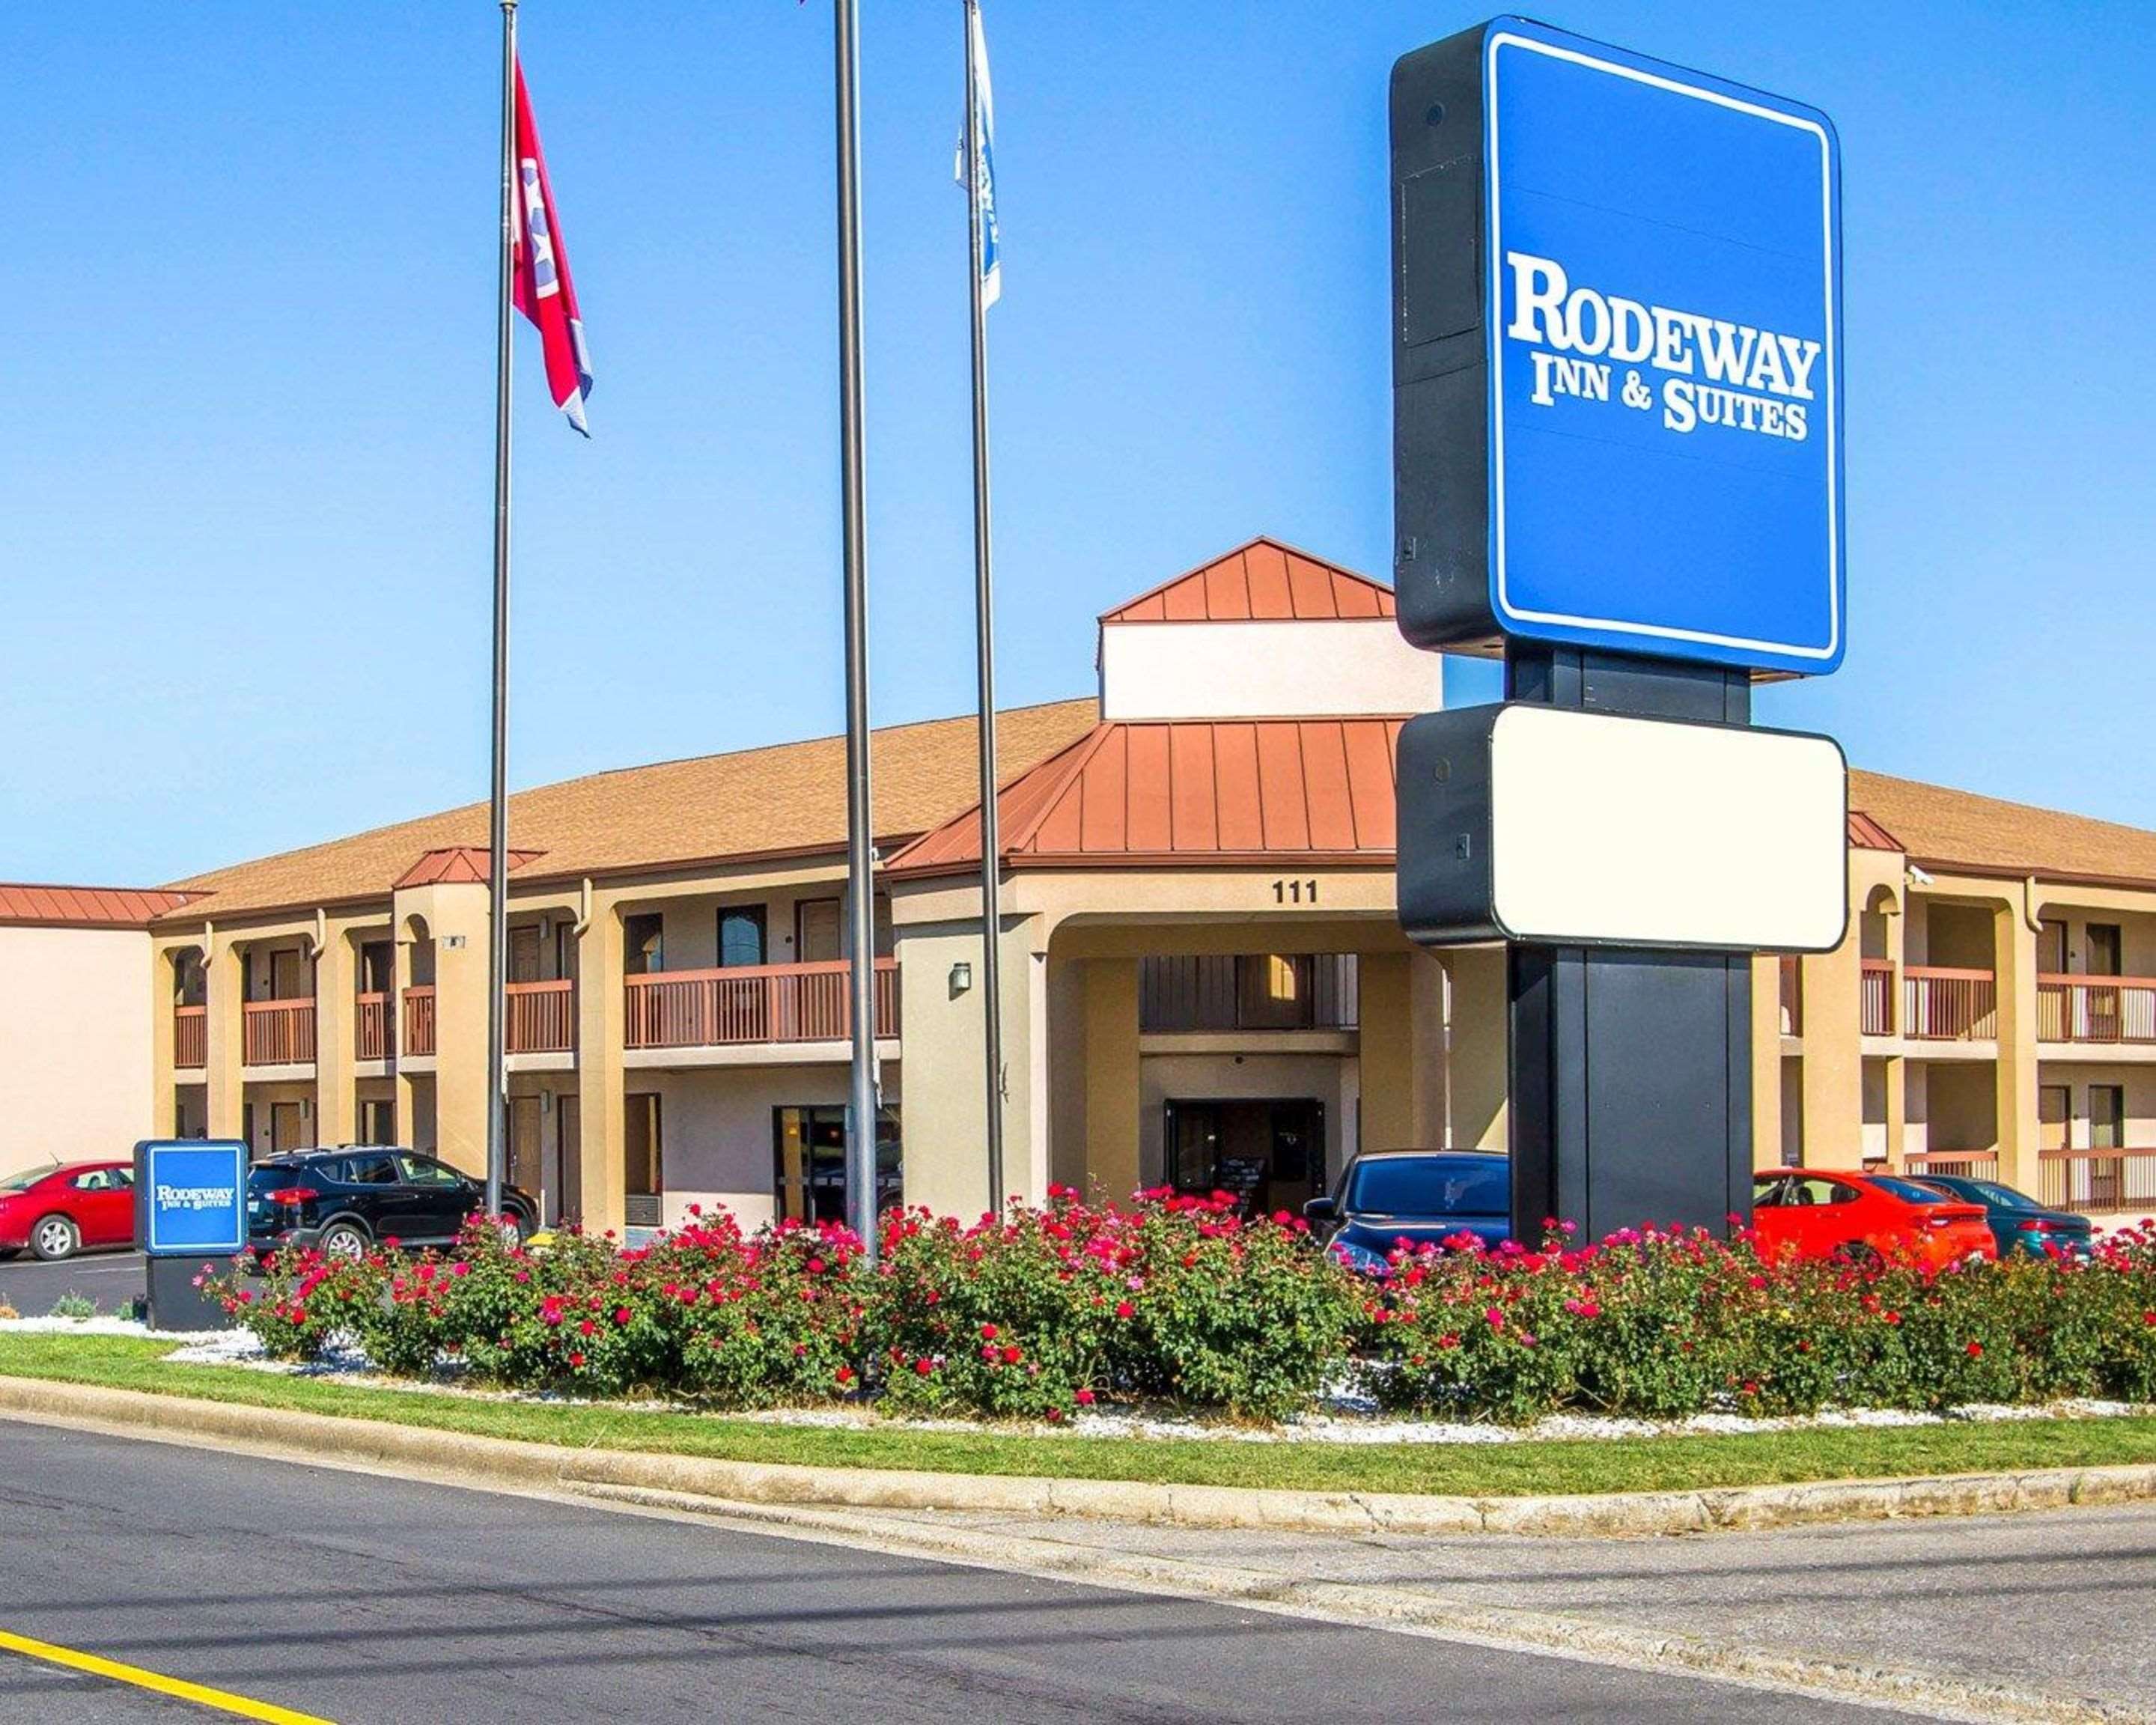 Rodeway Inn & Suites Coupons near me in Clarksville, TN 37040 8coupons